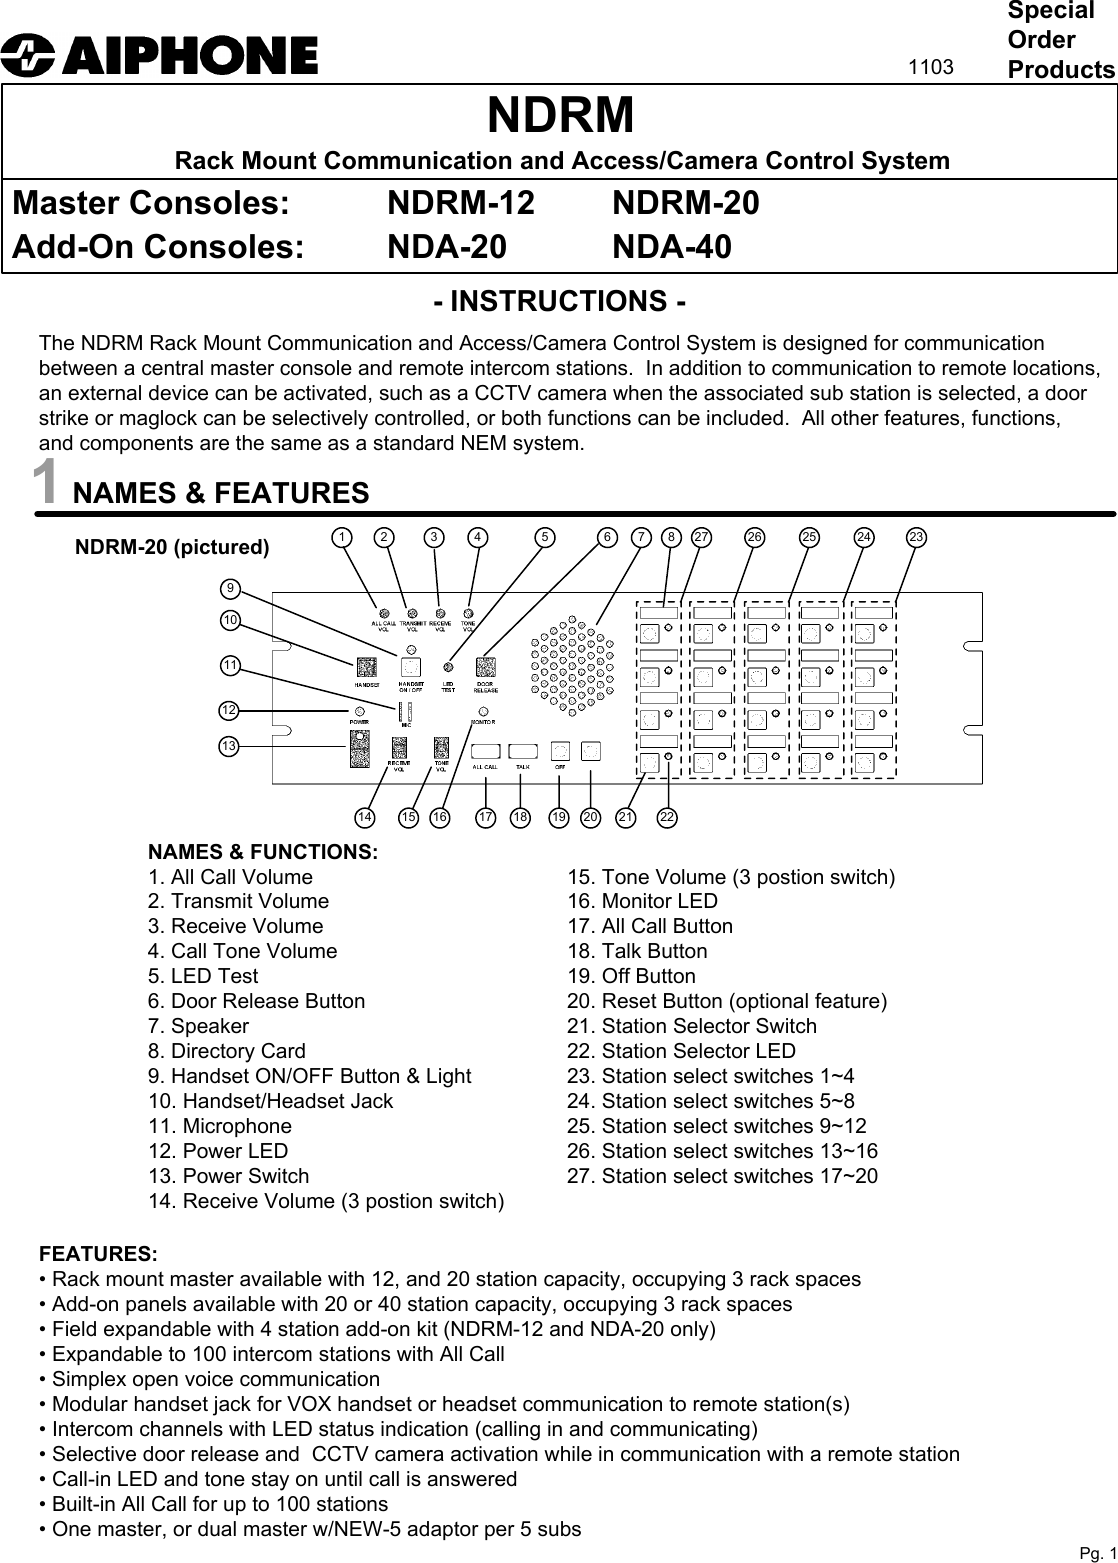 Page 1 of 9 - Aiphone Aiphone-Ndrm-Users-Manual- Visio-NDRM Instructions  Aiphone-ndrm-users-manual